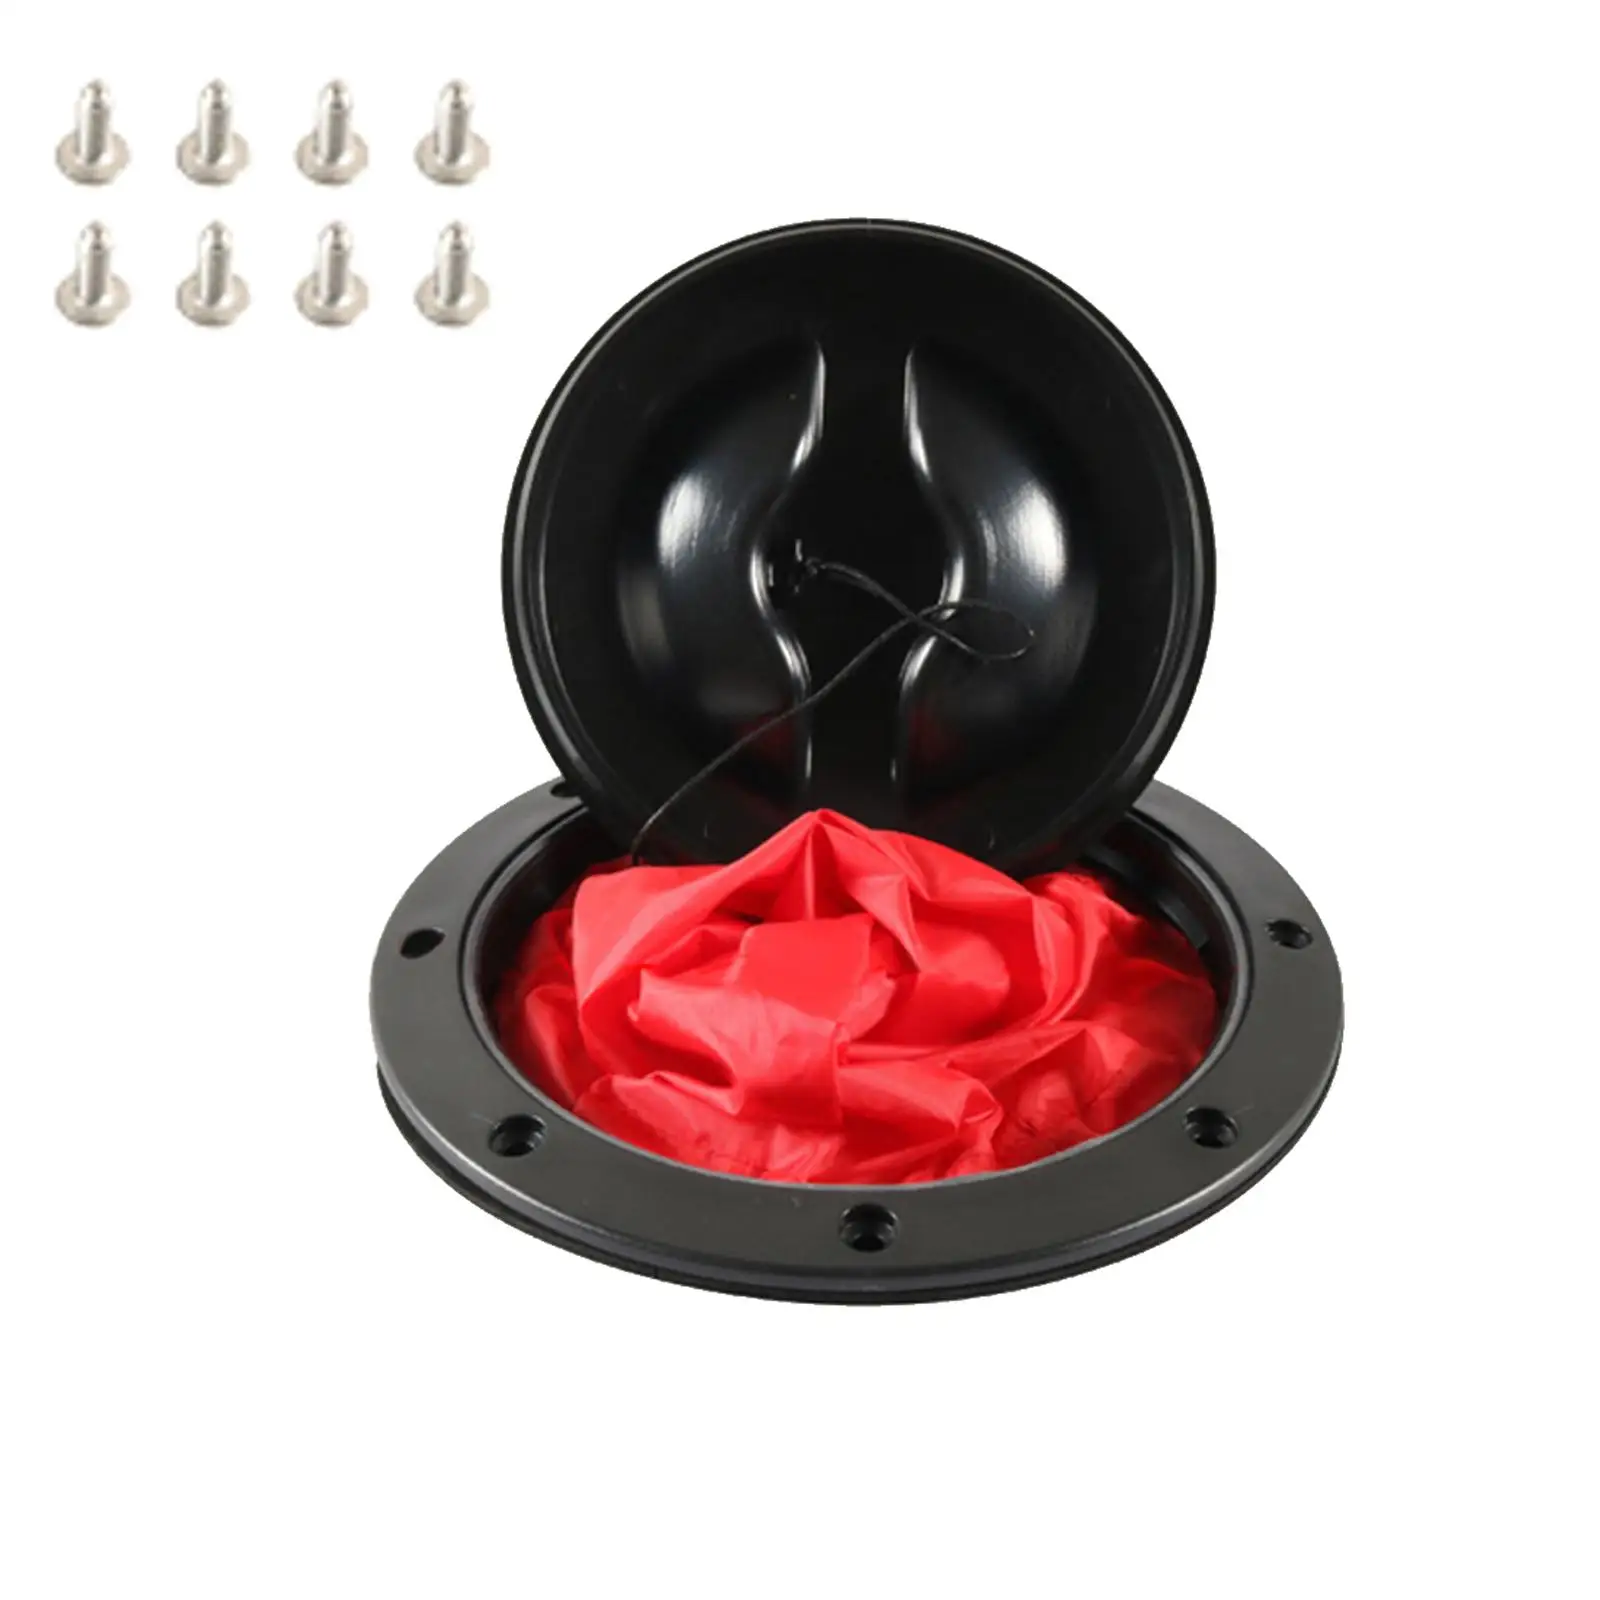 6 in Hatch Cover Accessories Boat Easy Install ABS Deck Plate Lockable Black With Screw Waterproof For Kayak Portable Round